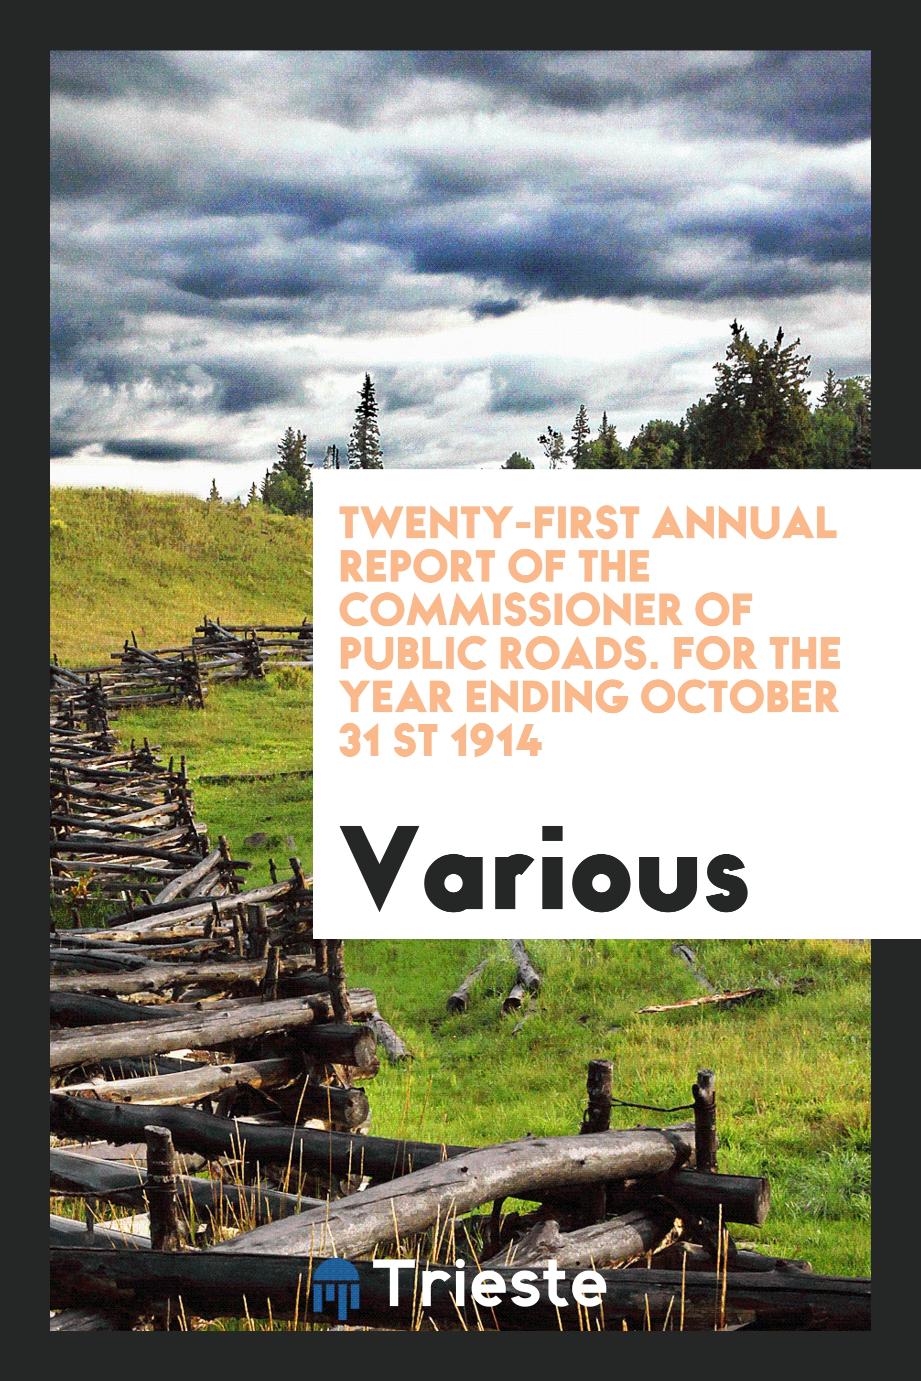 Twenty-First Annual Report of the Commissioner of Public Roads. For the Year Ending October 31 st 1914